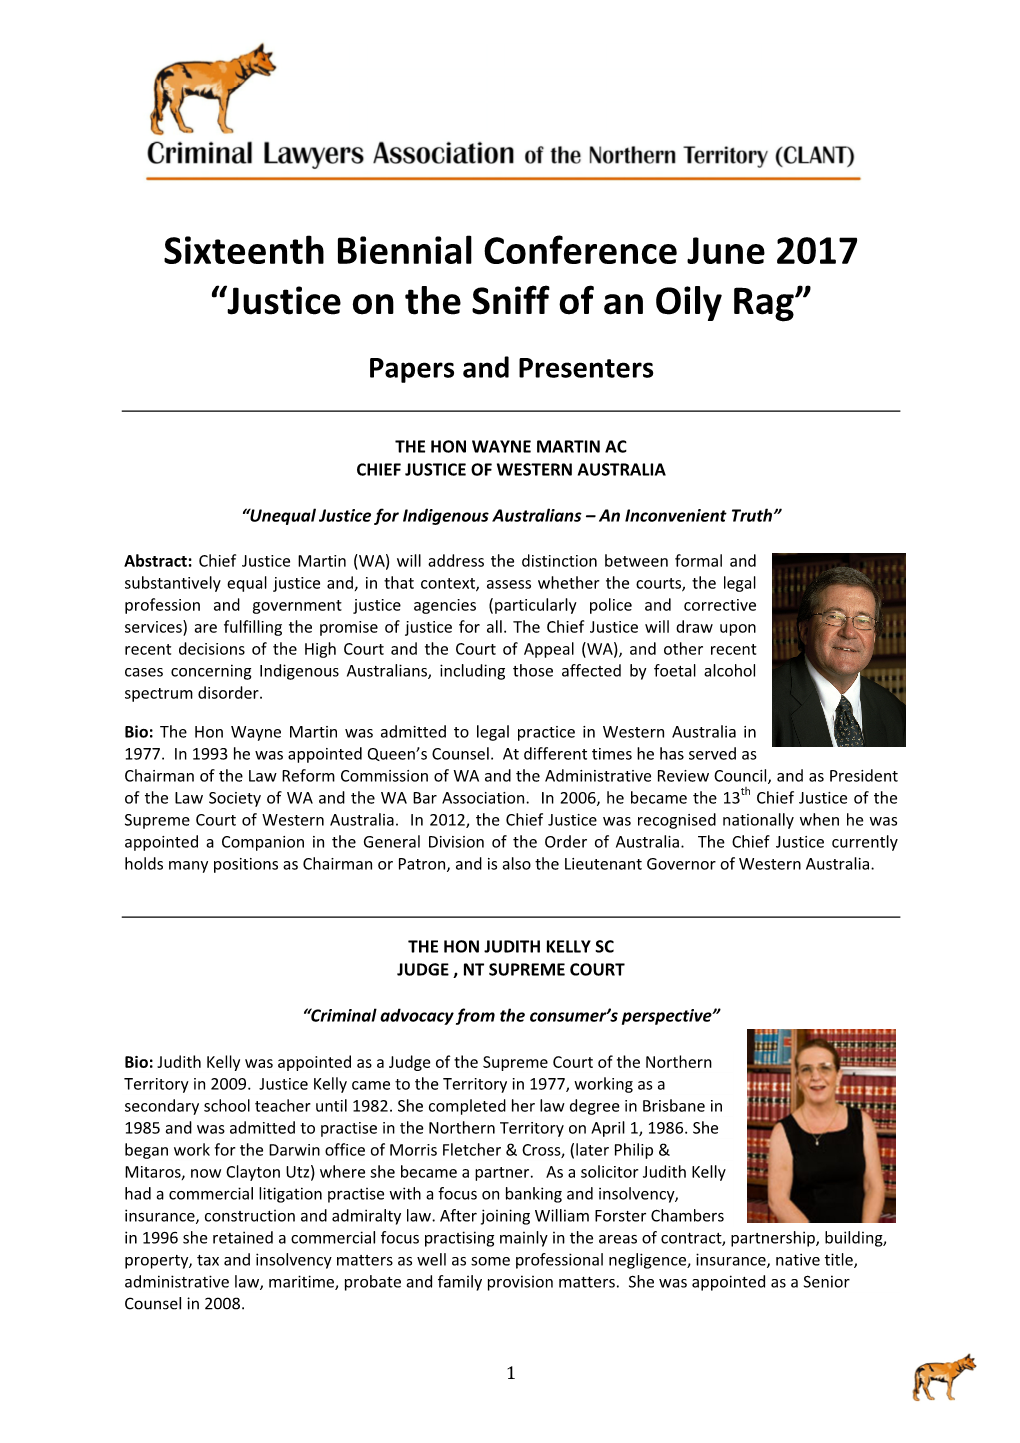 Sixteenth Biennial Conference June 2017 “Justice on the Sniff of an Oily Rag”